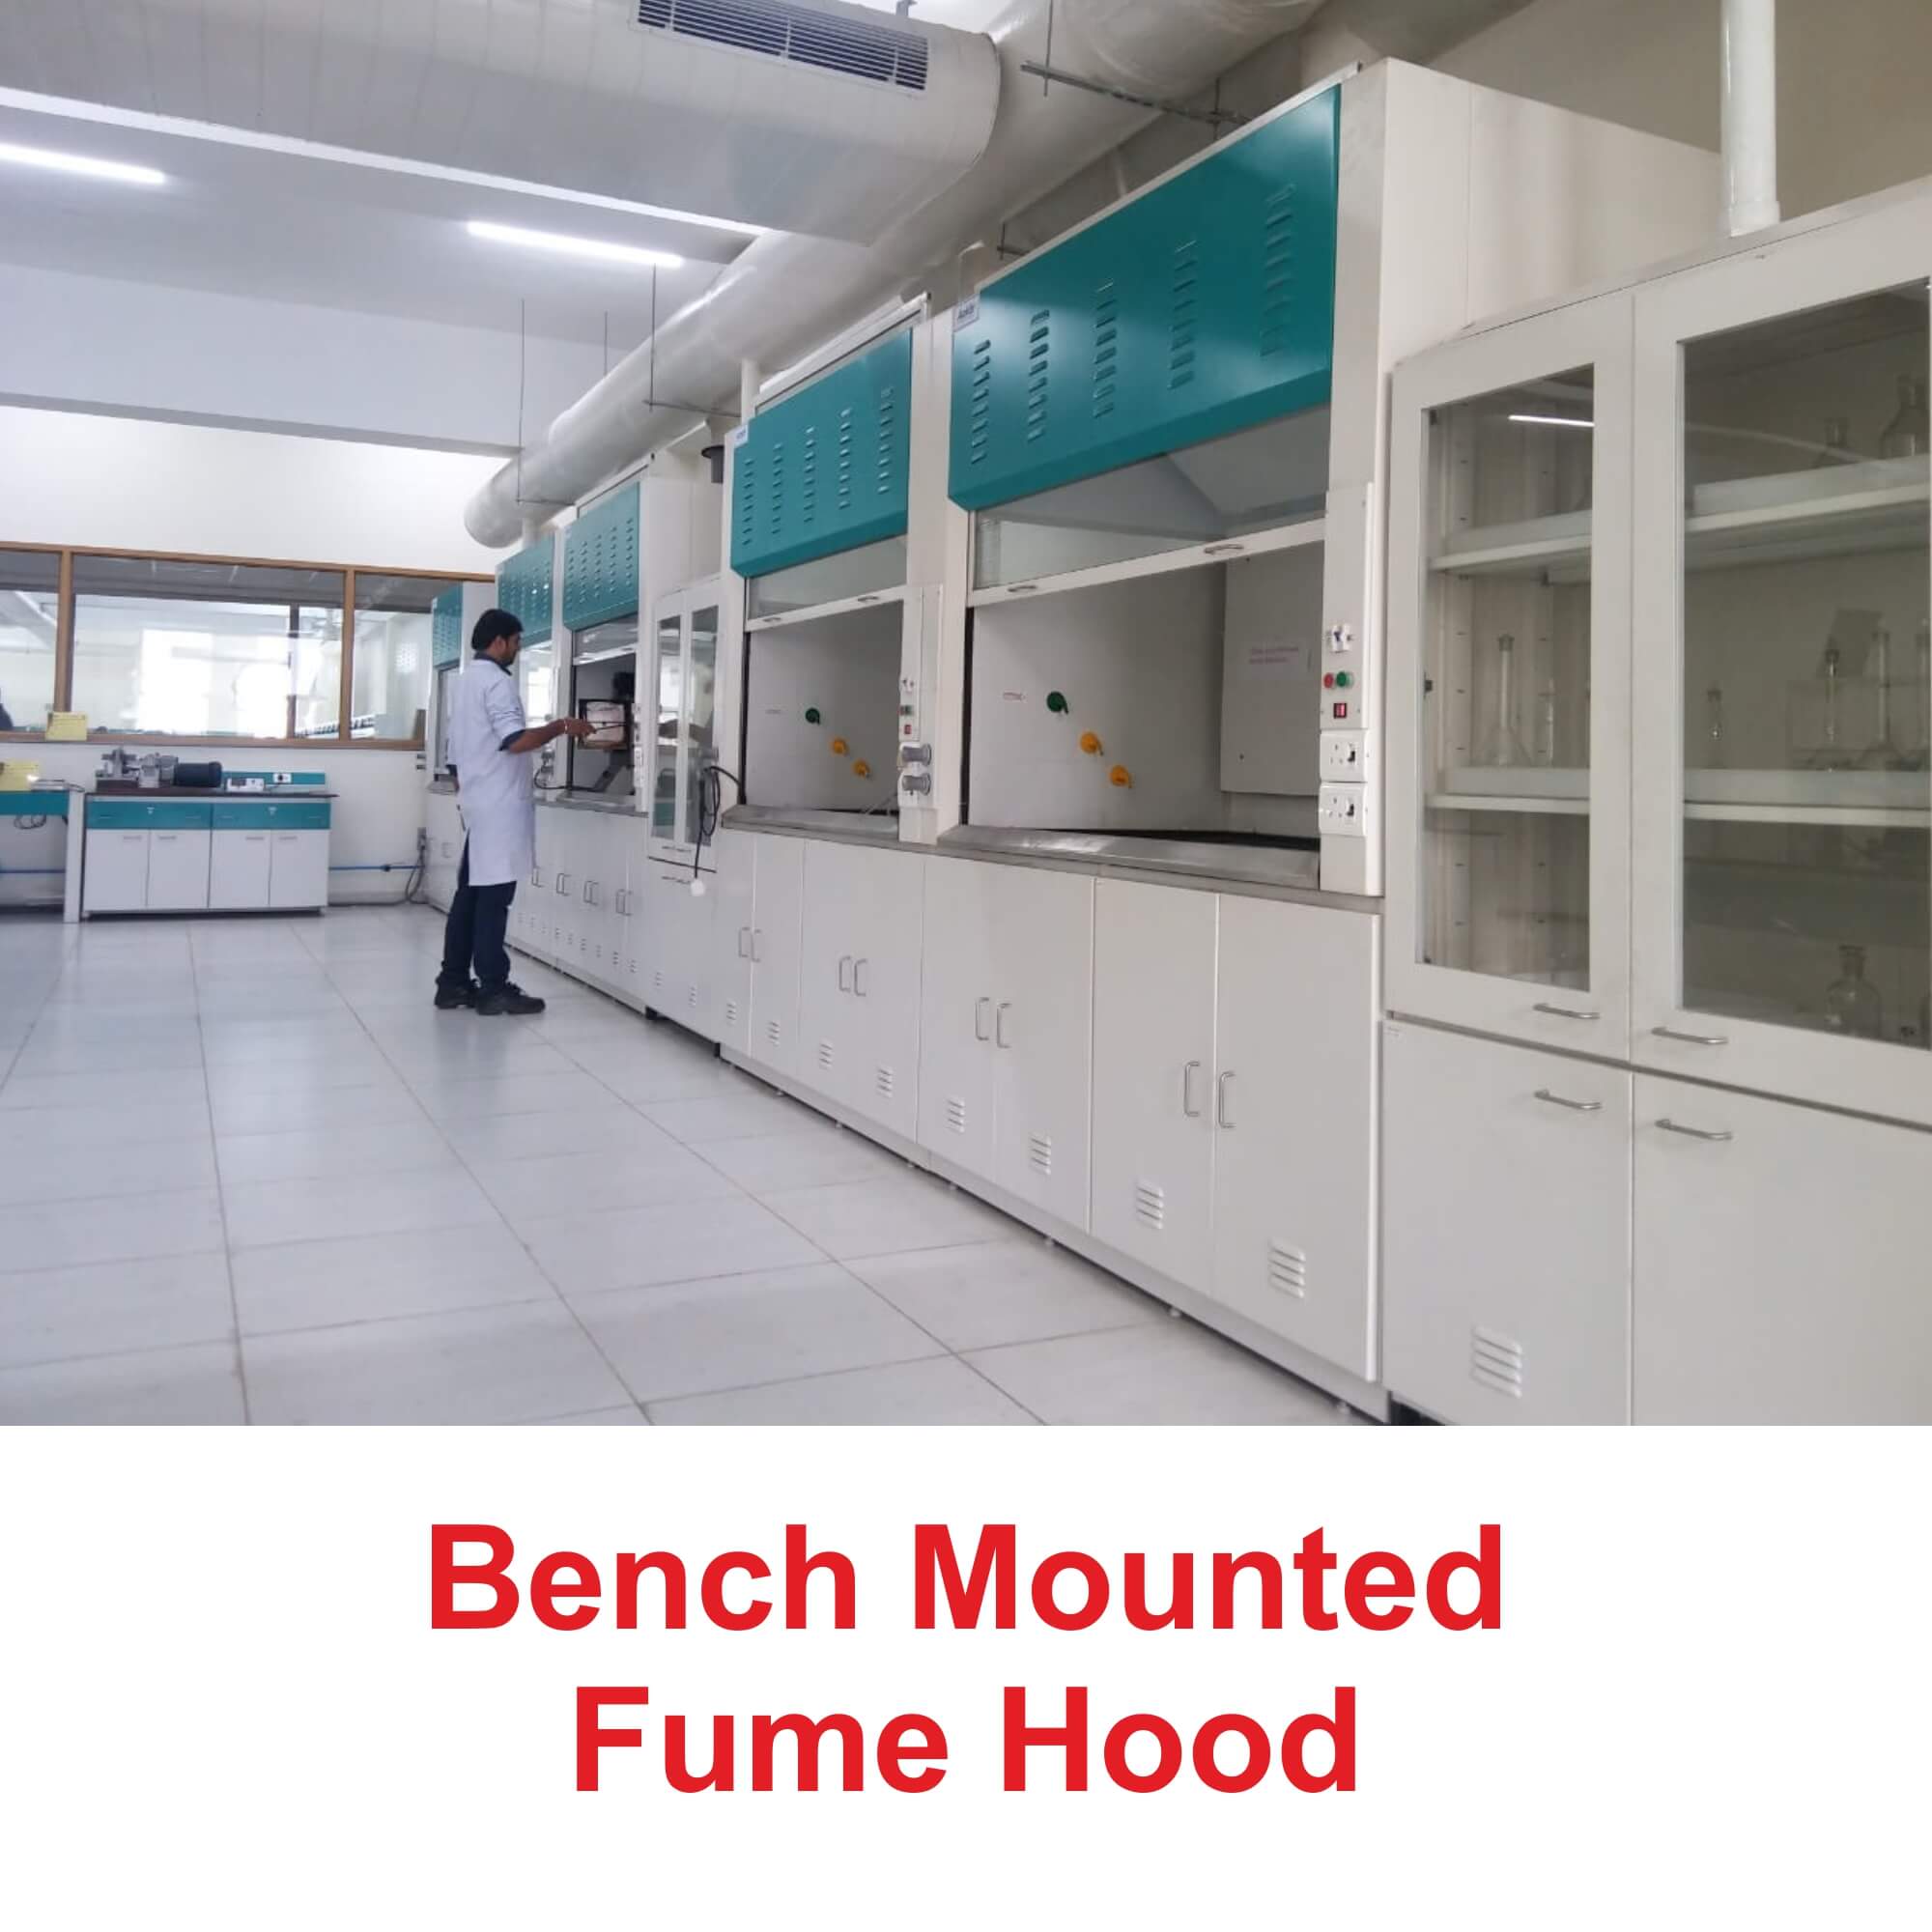 Bench Mounted Fume Hood Manufacturer in India